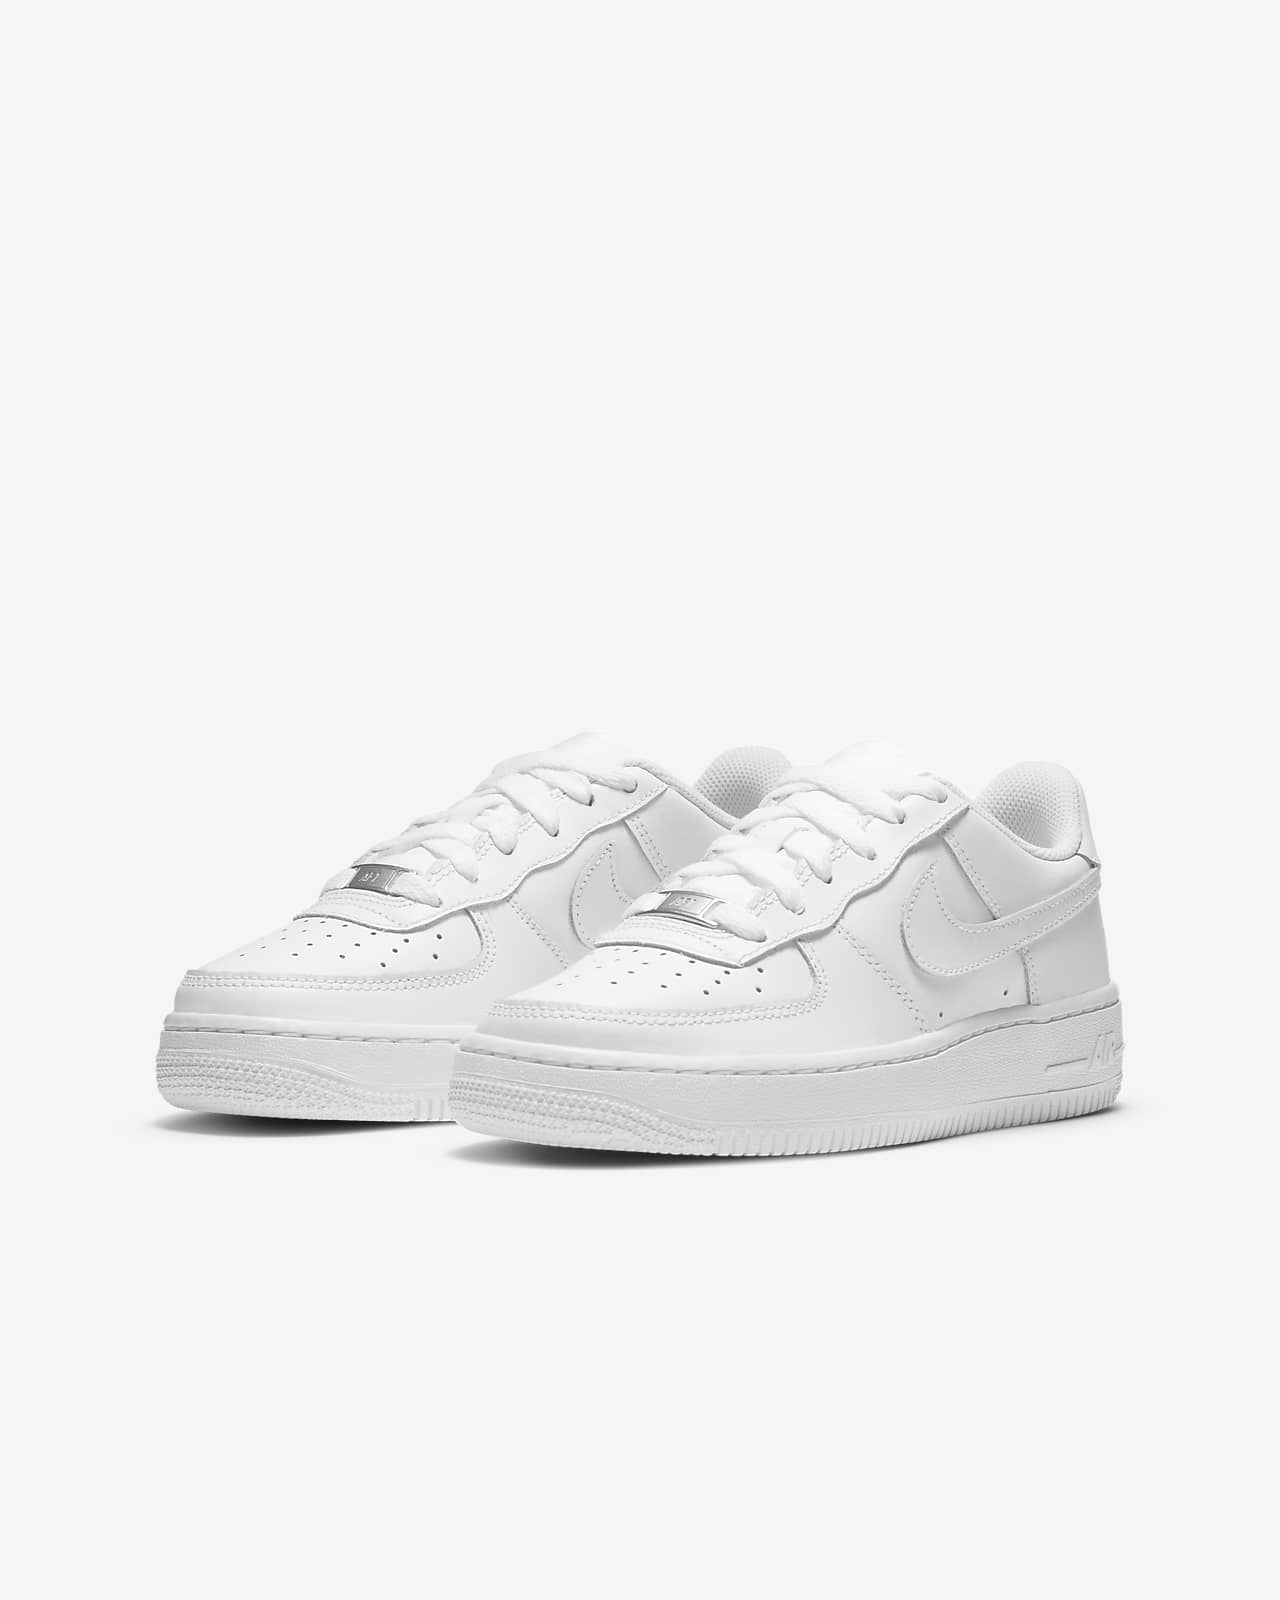 air force 1 junior size 4.5